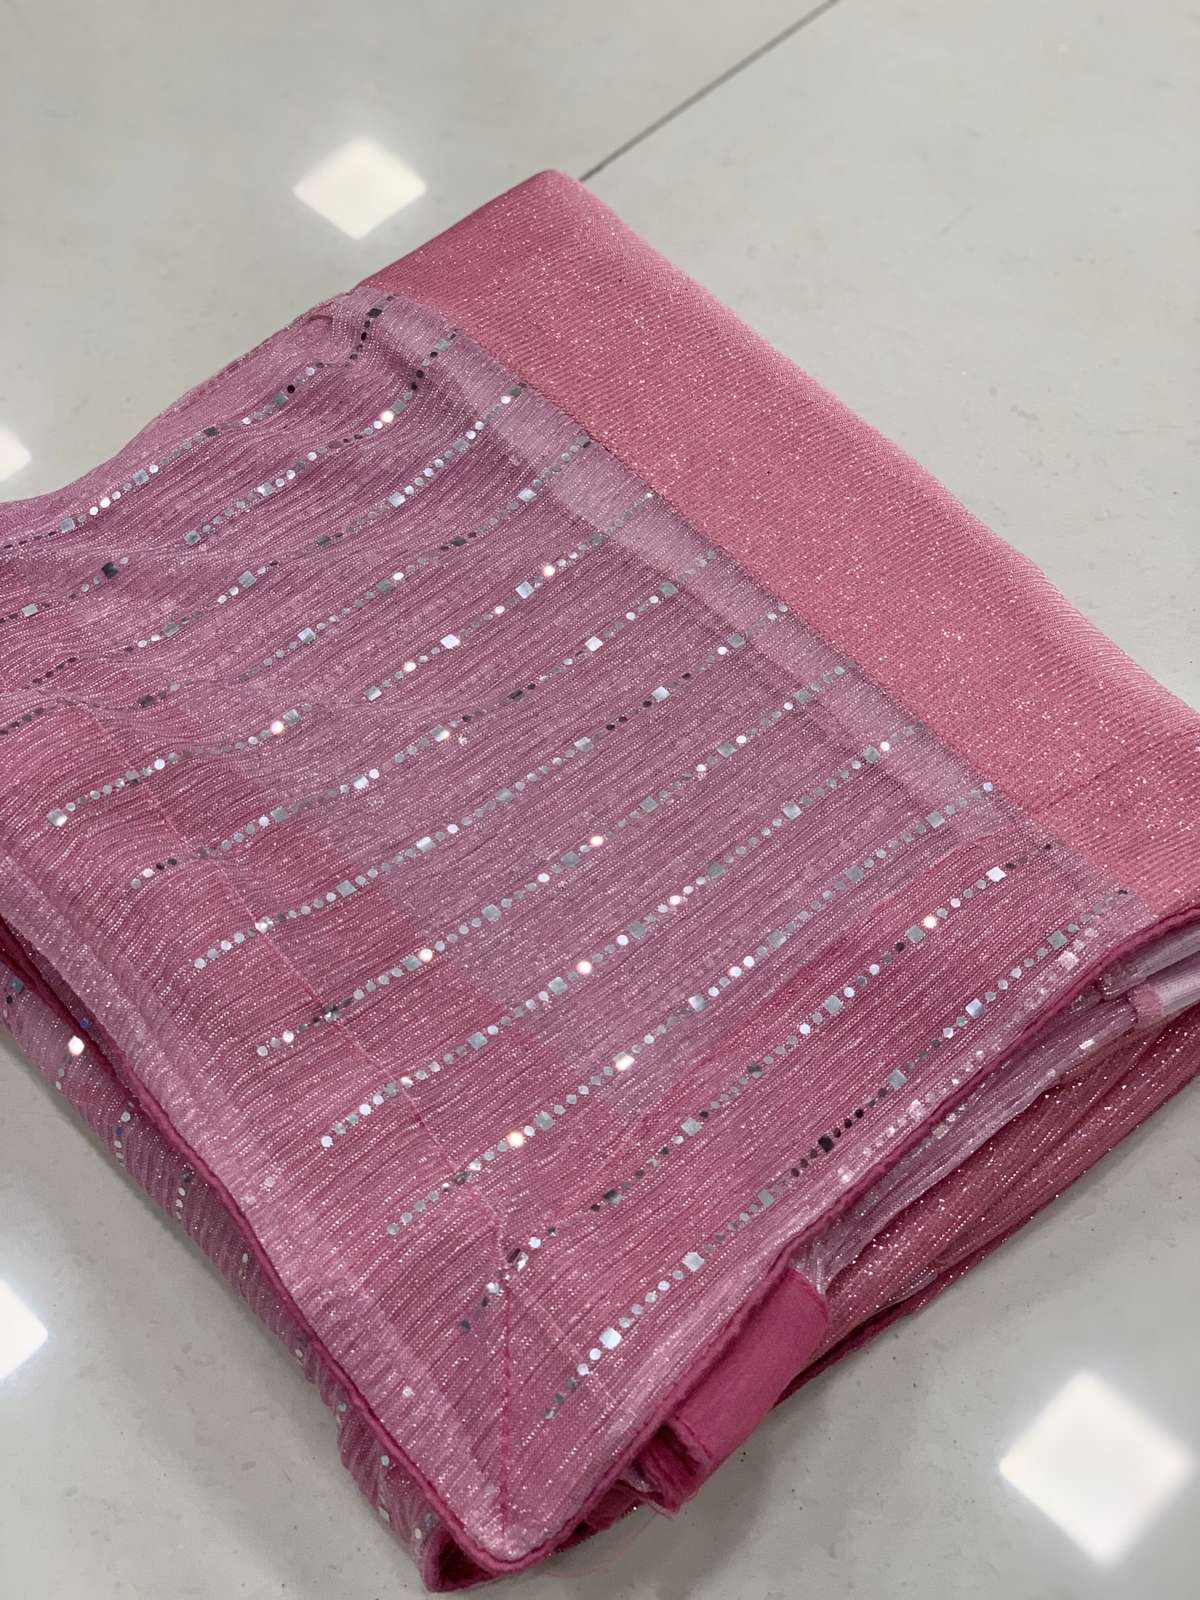 IMPORTED JARI LYCRA FABRIC WITH FEATURES LACE BORDER SAREES ...